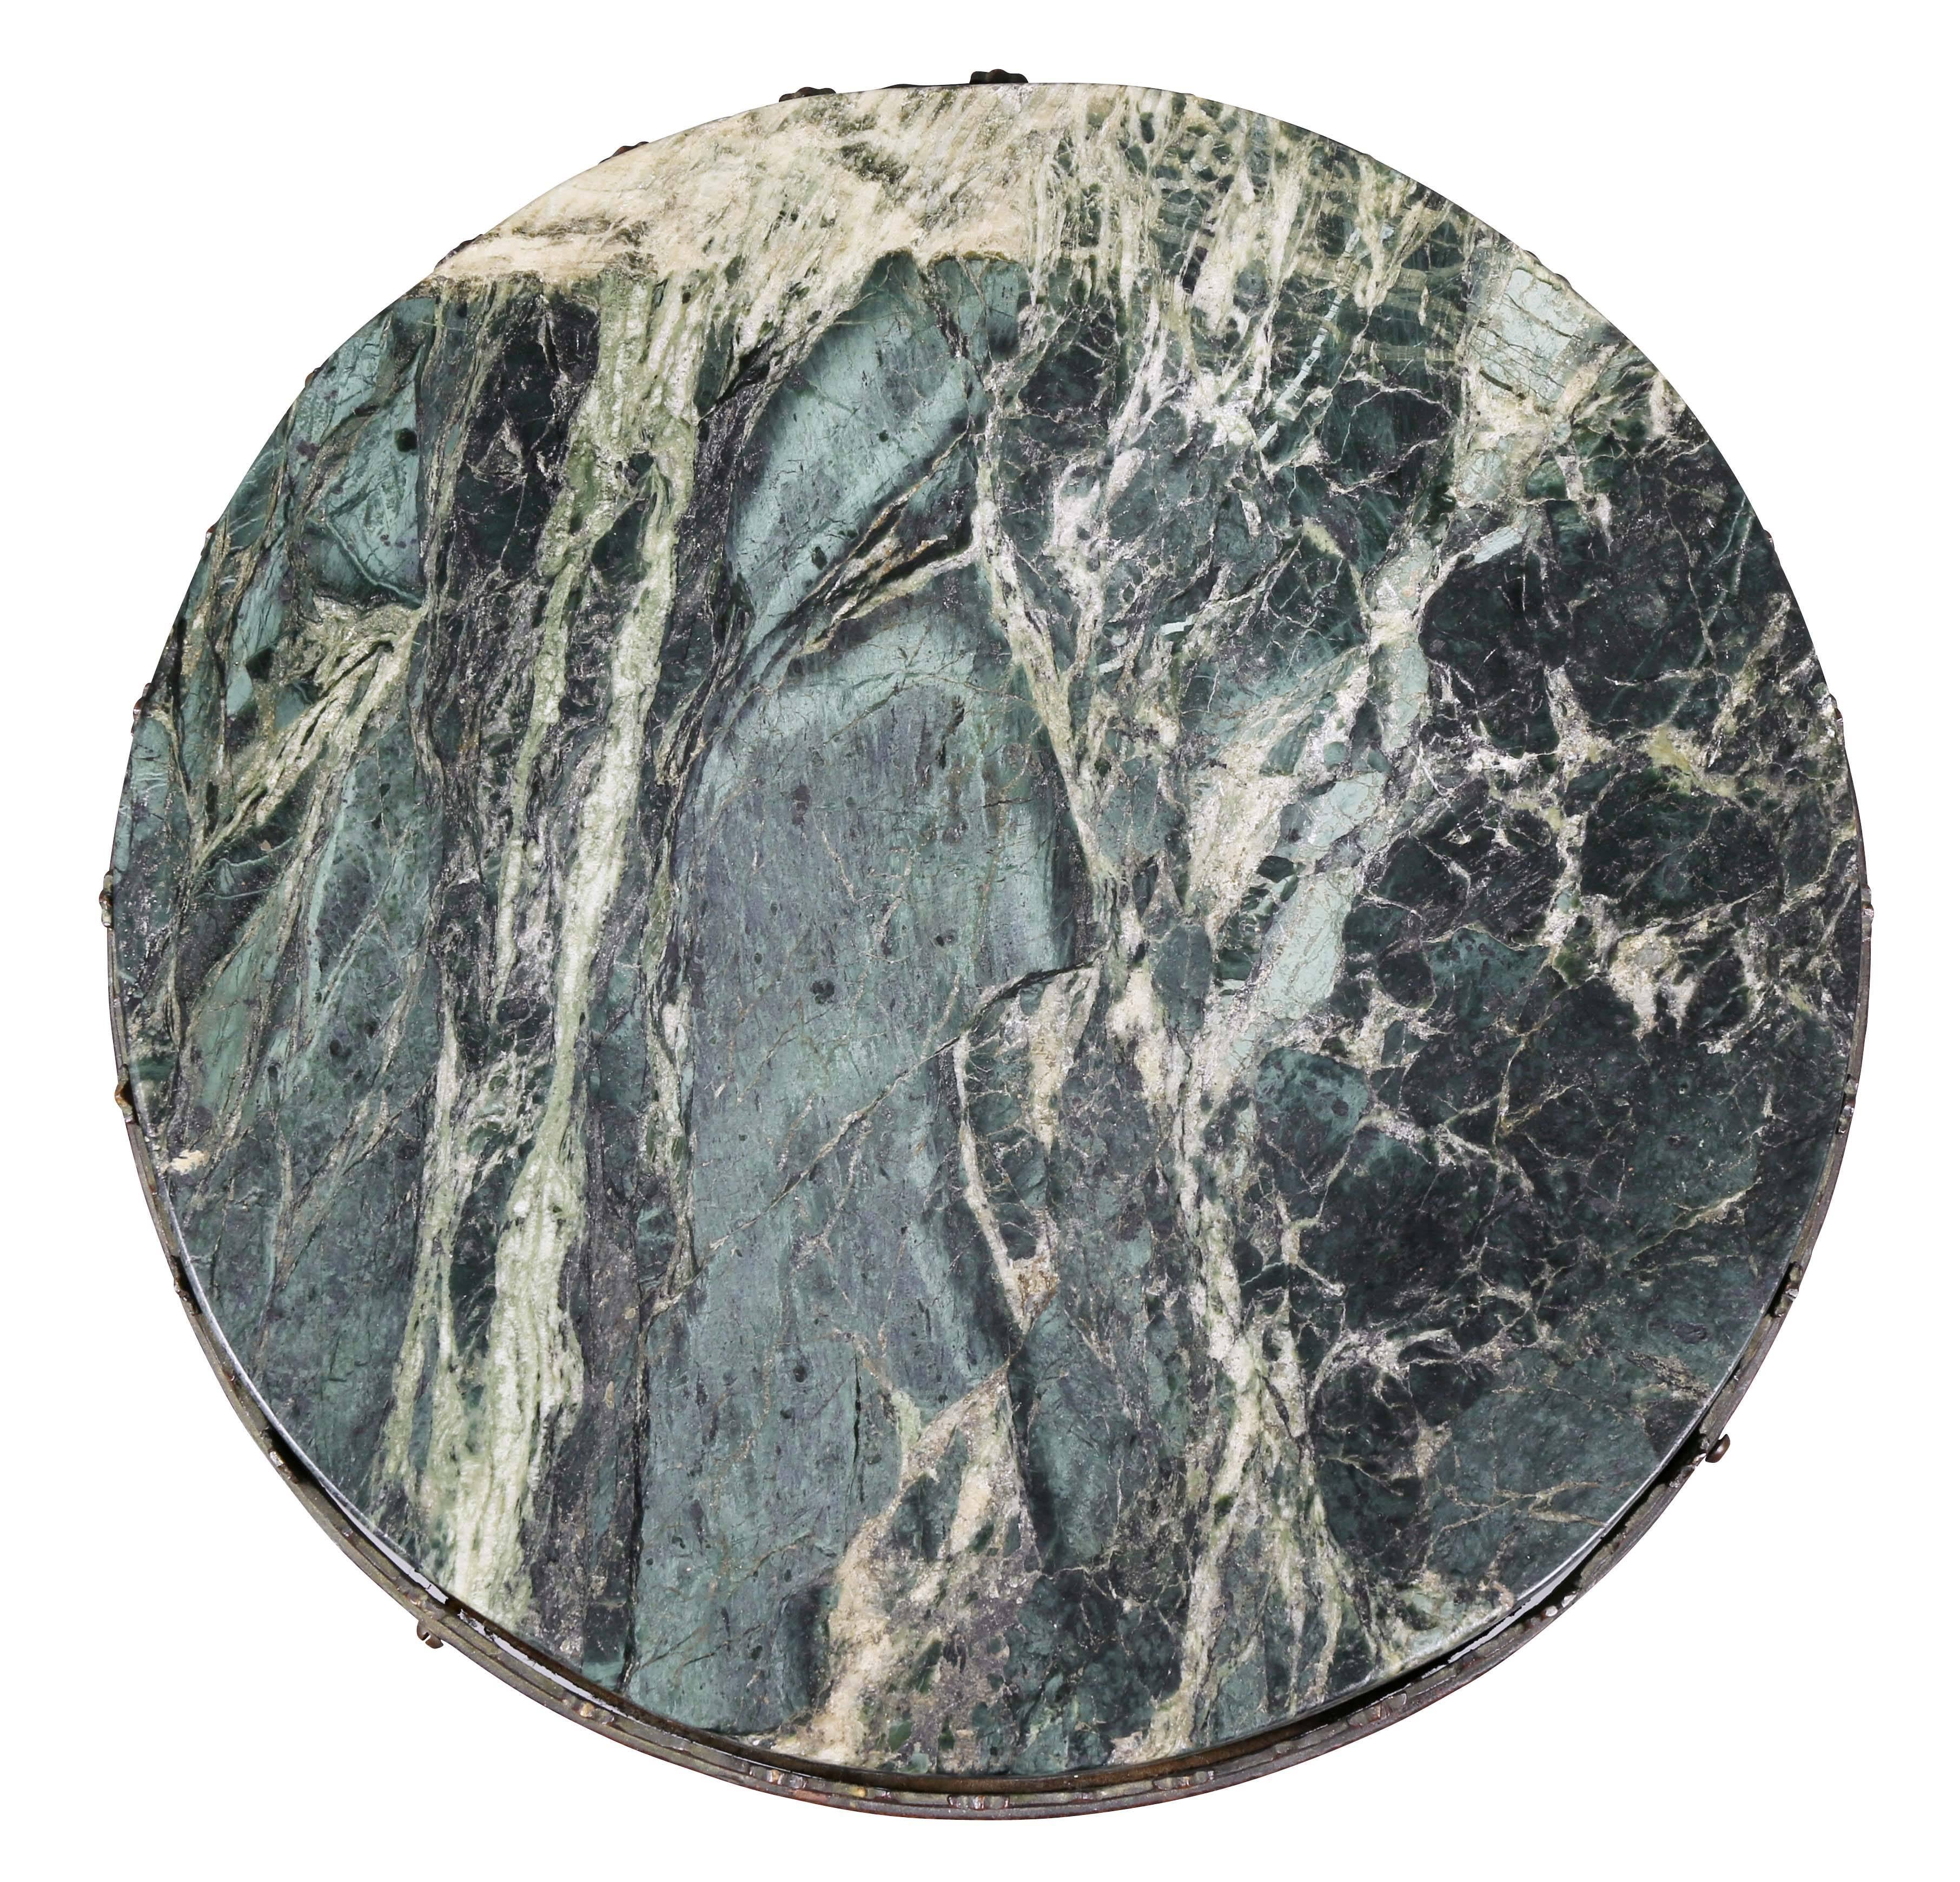 Circular with conforming inset green marble and pierced frieze raised on four legs that join a circular stretcher, bronze feet.